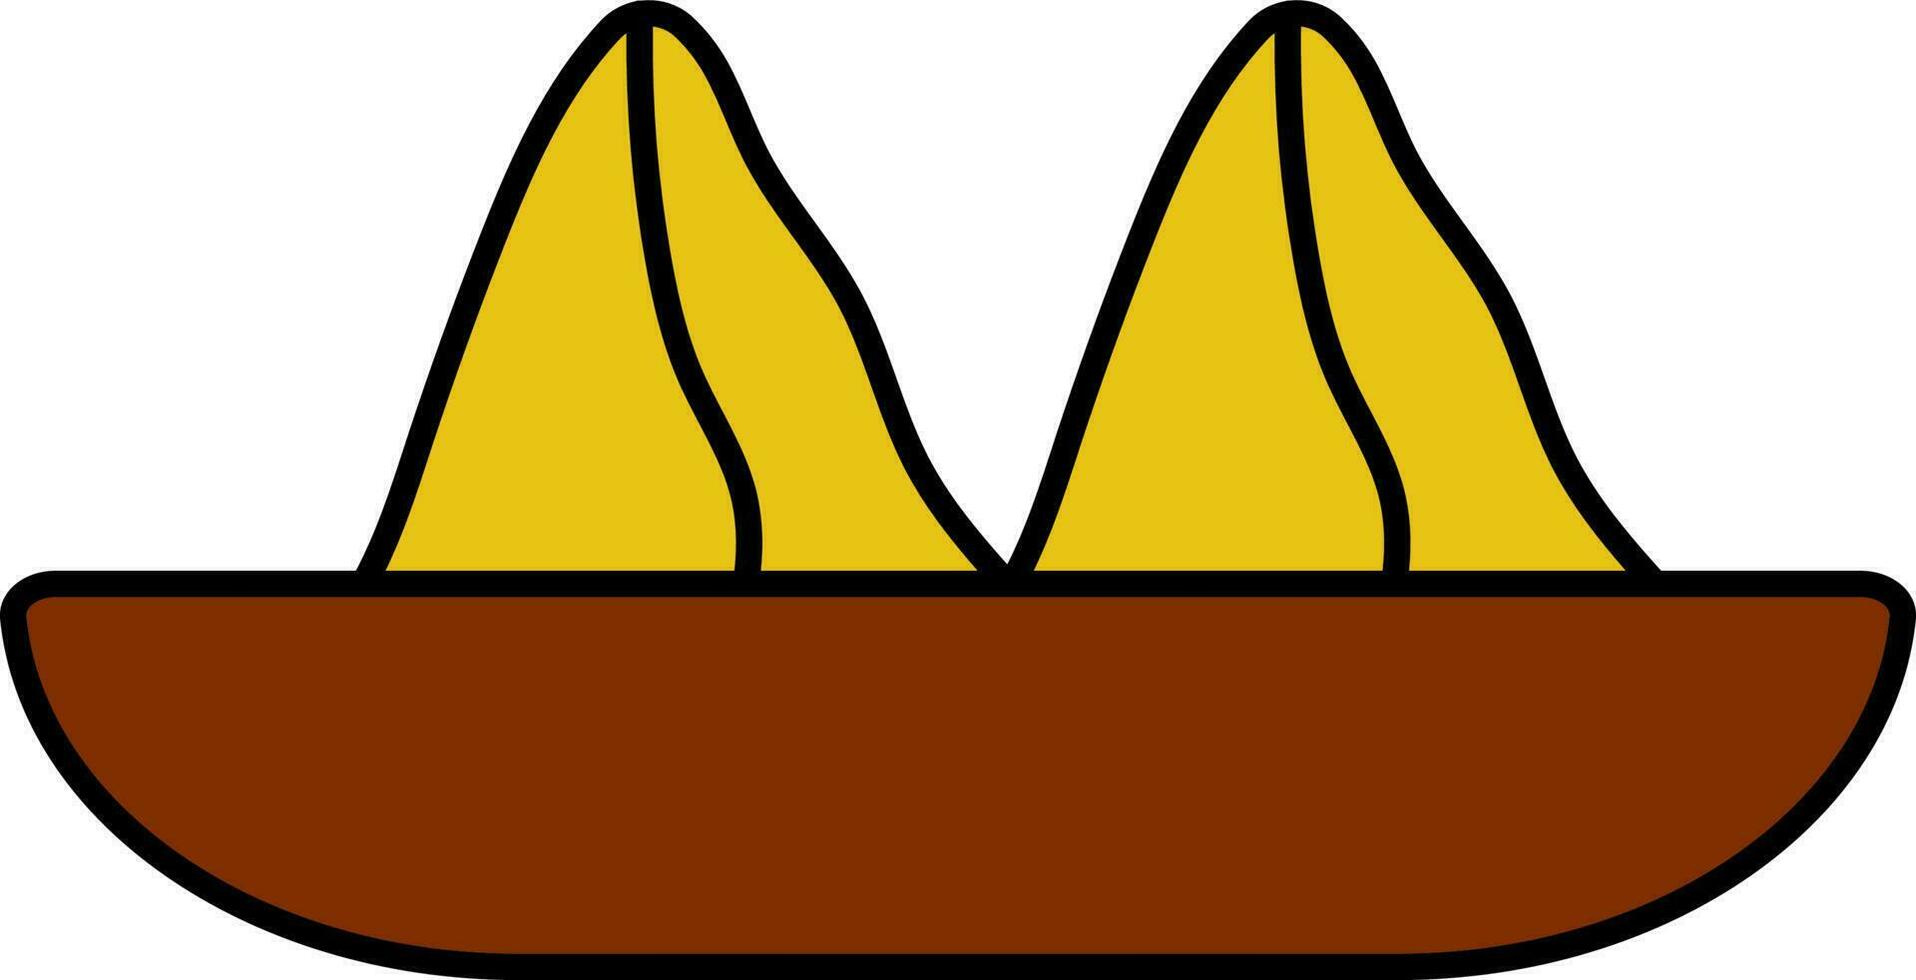 Flat Samosa Indian Snack Plate Icon In Yellow And Brown Color. vector